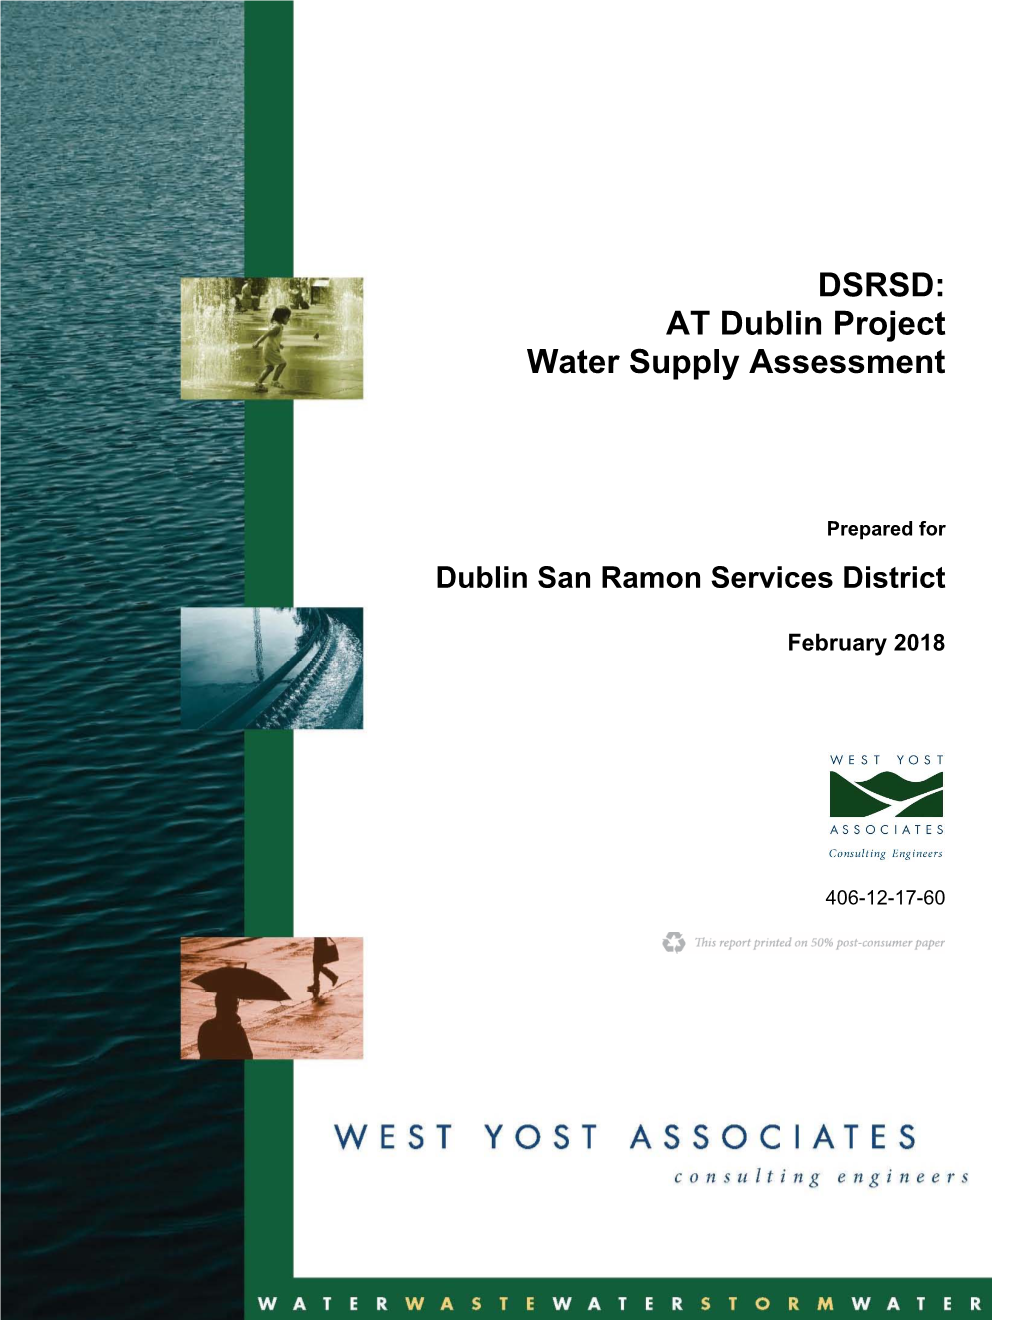 DSRSD: at Dublin Project Water Supply Assessment